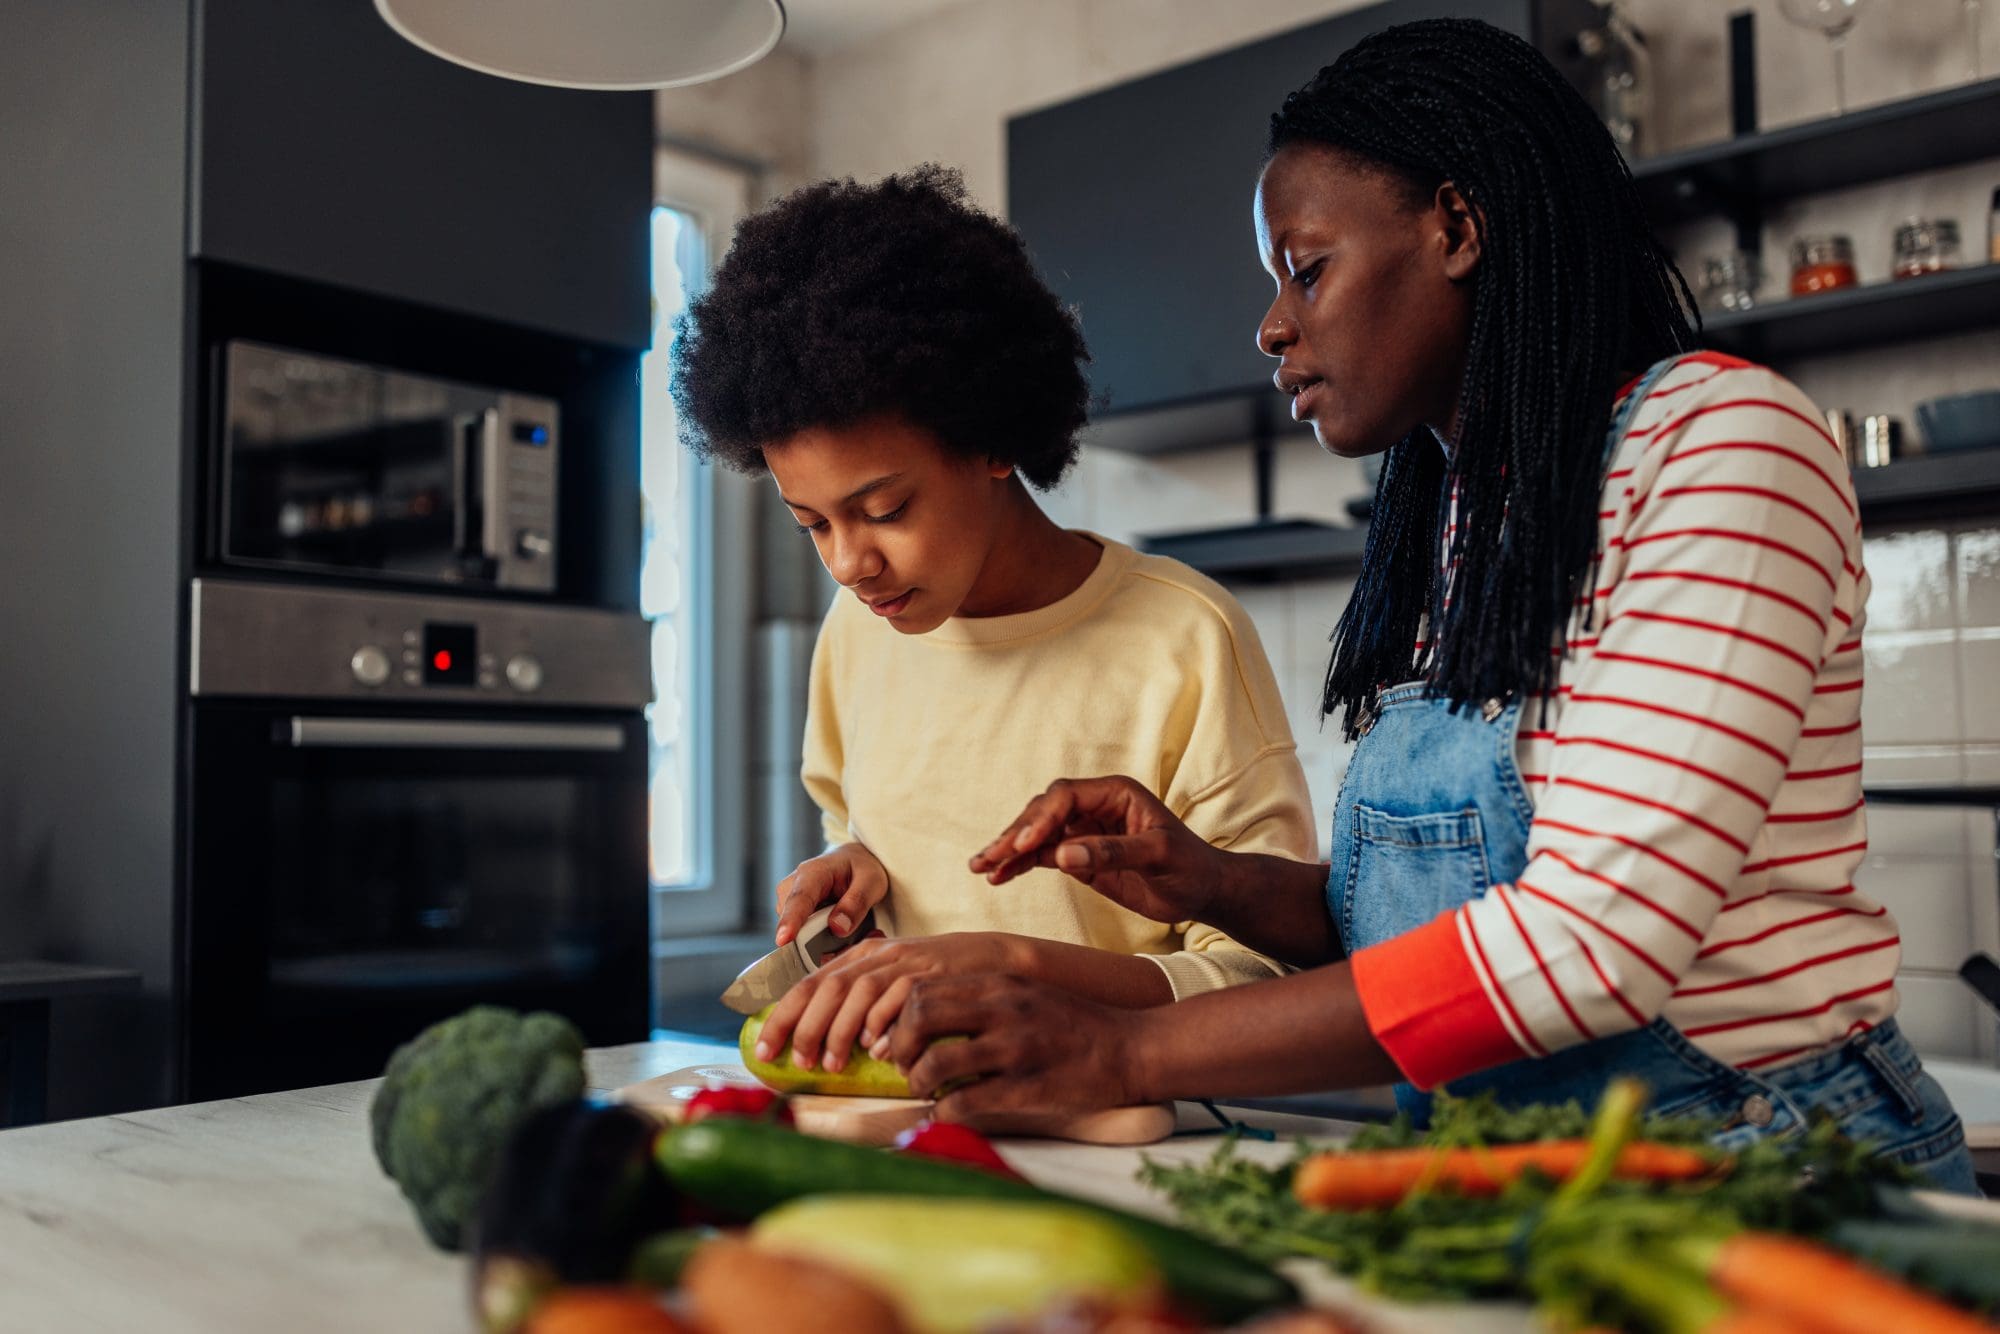 Teen with mental health challenges practices nutritional awareness by cooking with parent. 